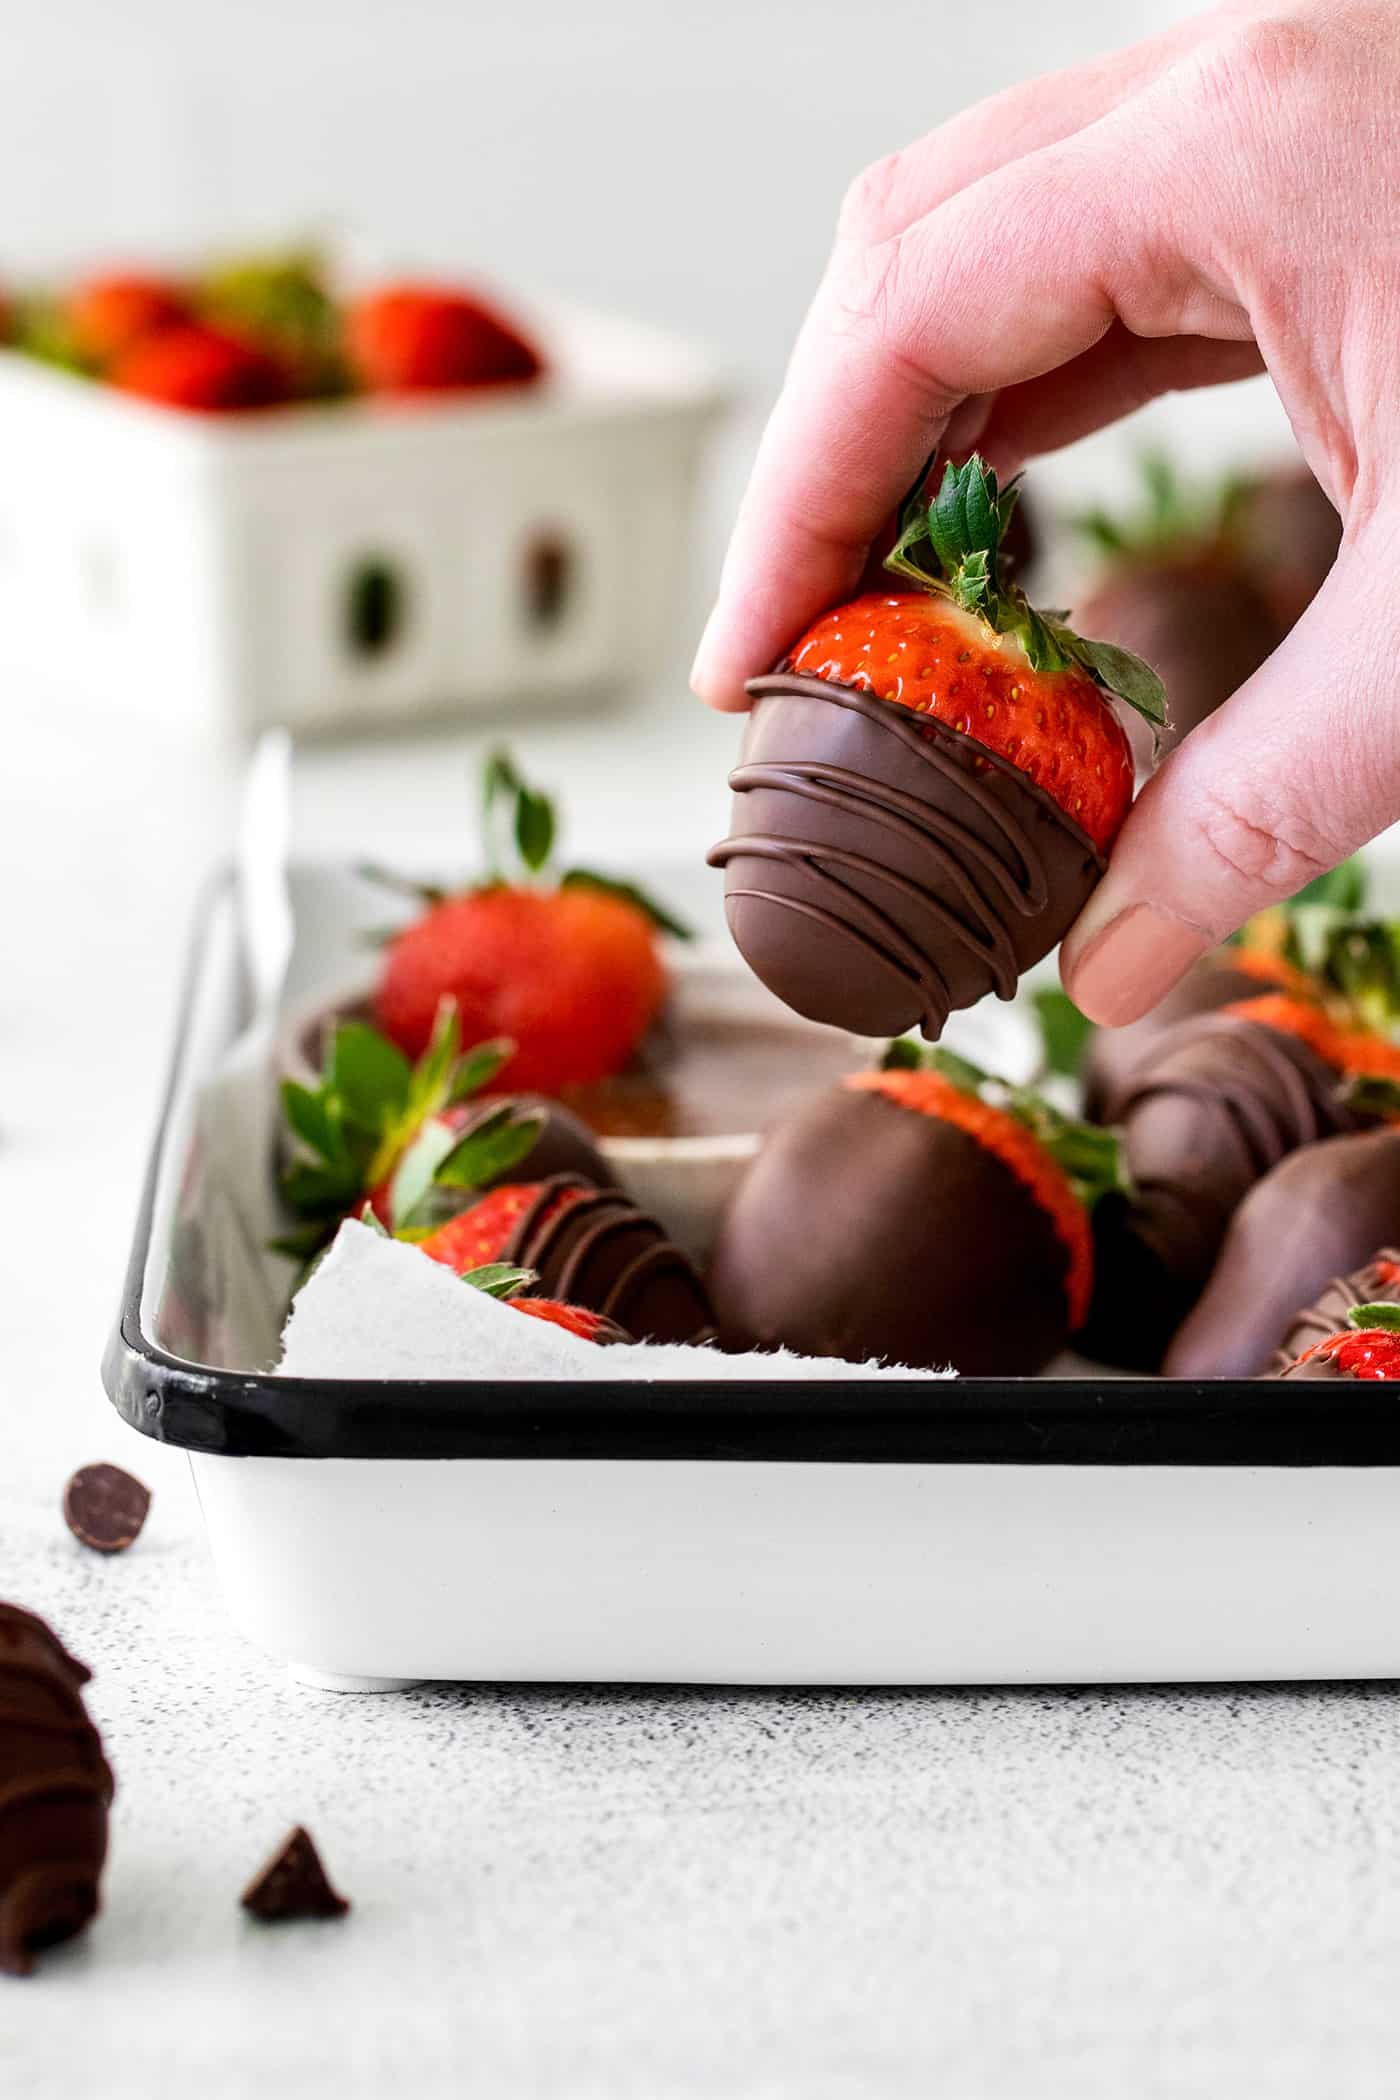 A hand holding a chocolate covered strawberry